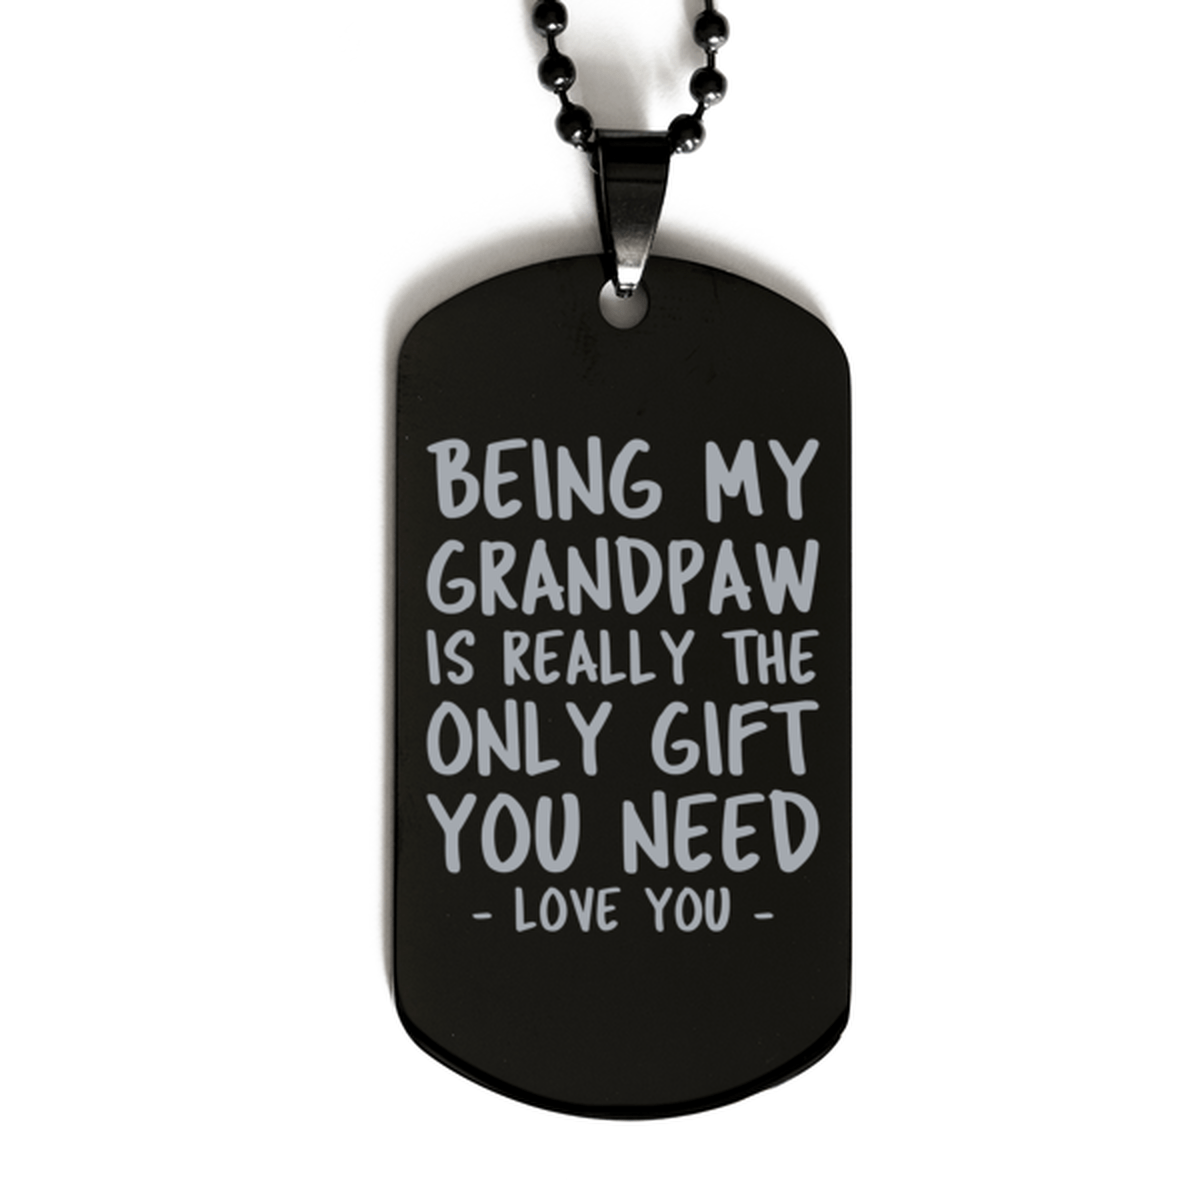 Funny Grandpaw Black Dog Tag Necklace, Being My Grandpaw Is Really the Only Gift You Need, Best Birthday Gifts for Grandpaw